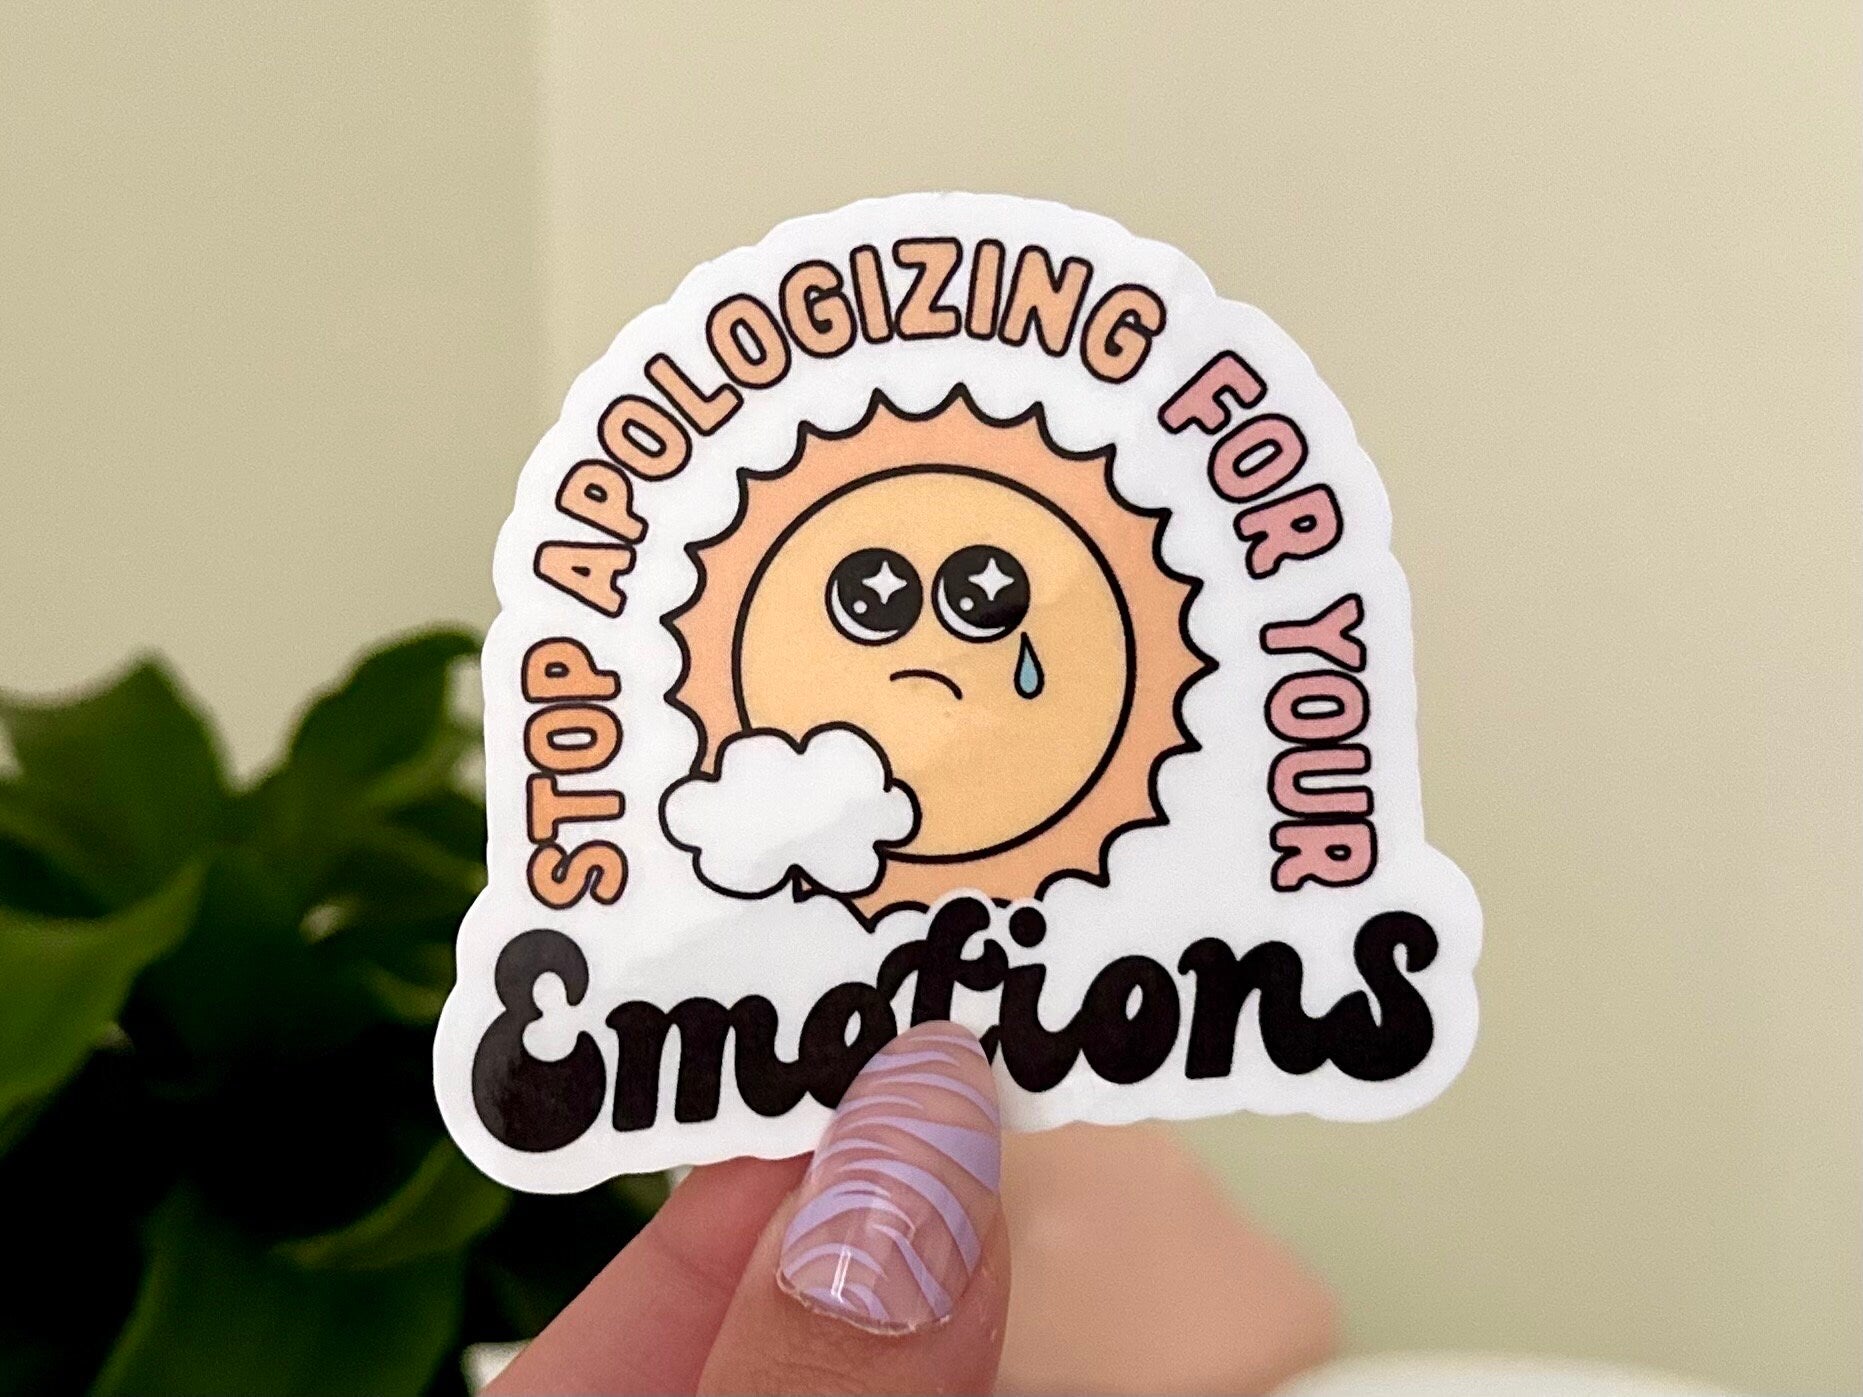 Stop Apologizing For Your Emotions Waterproof Sticker, Groovy Sticker, Self Care, Self Love Sticker, Mental Health Gifts, Trendy Sticker